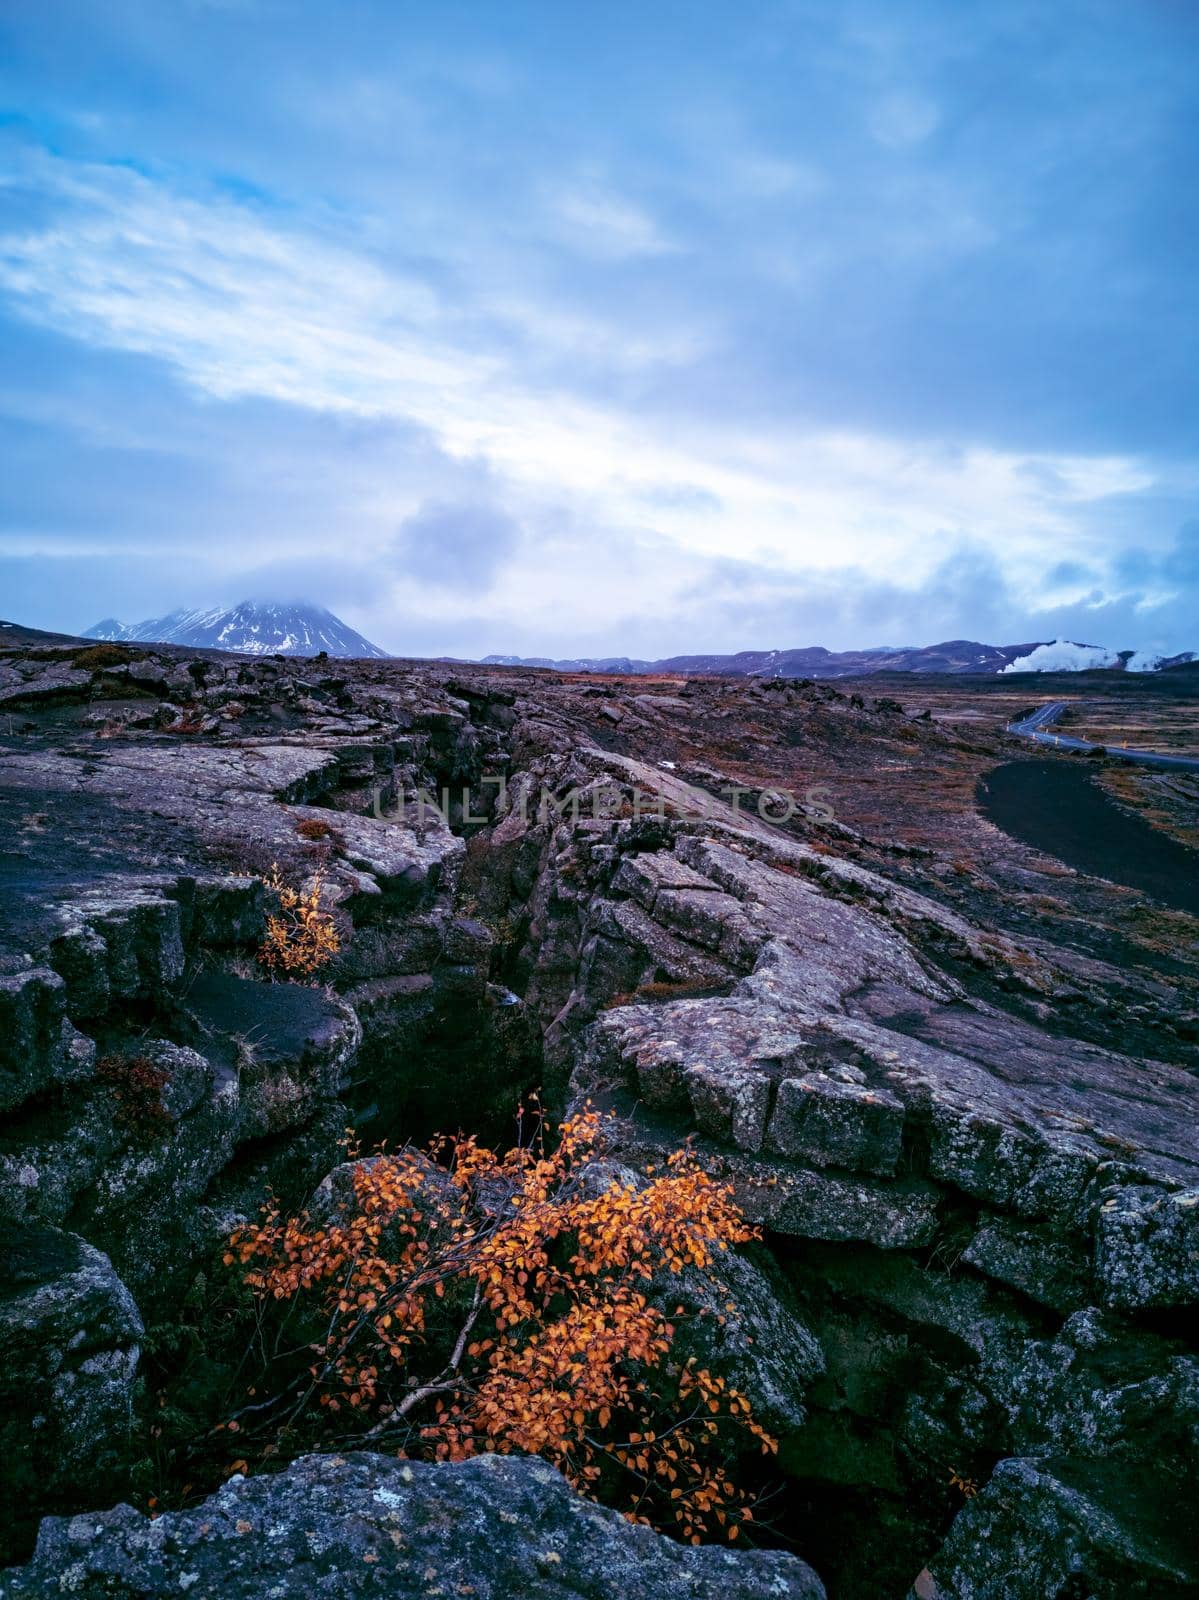 Huge crack on lava fields with tree under dark cloudy day